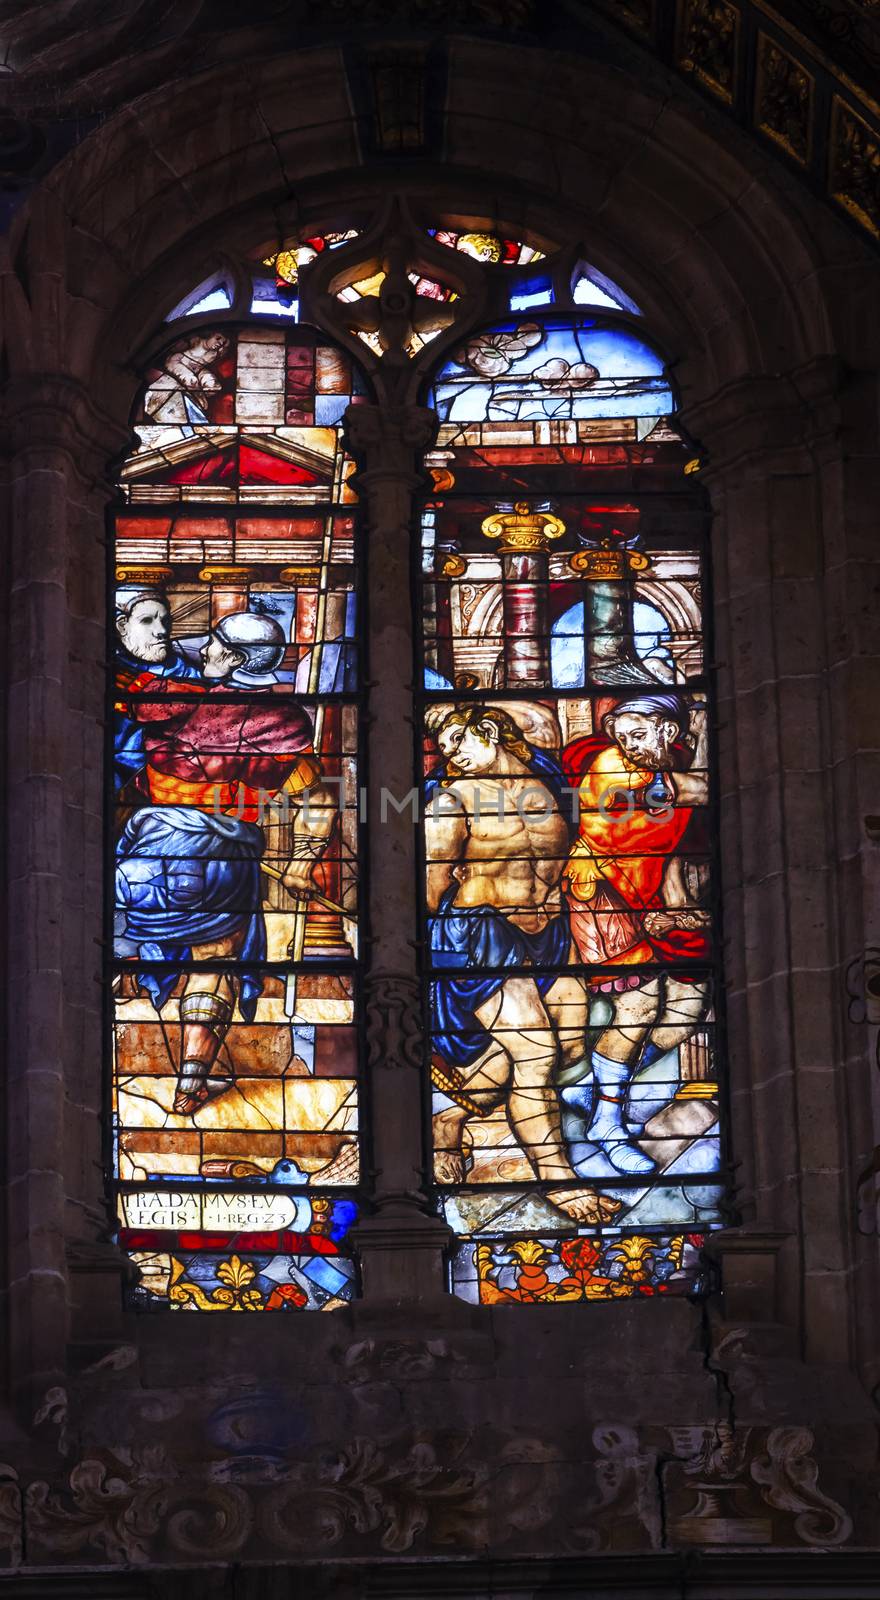 Jesus Christ Soldiers Stained Glass Salamanca New Cathedral Castile Spain. The New and Old Cathedrals in Salamanca are right next to each other.  New Cathedral was built from 1513 to 1733 and commissioned by Ferdinand V of Castile, Spain.